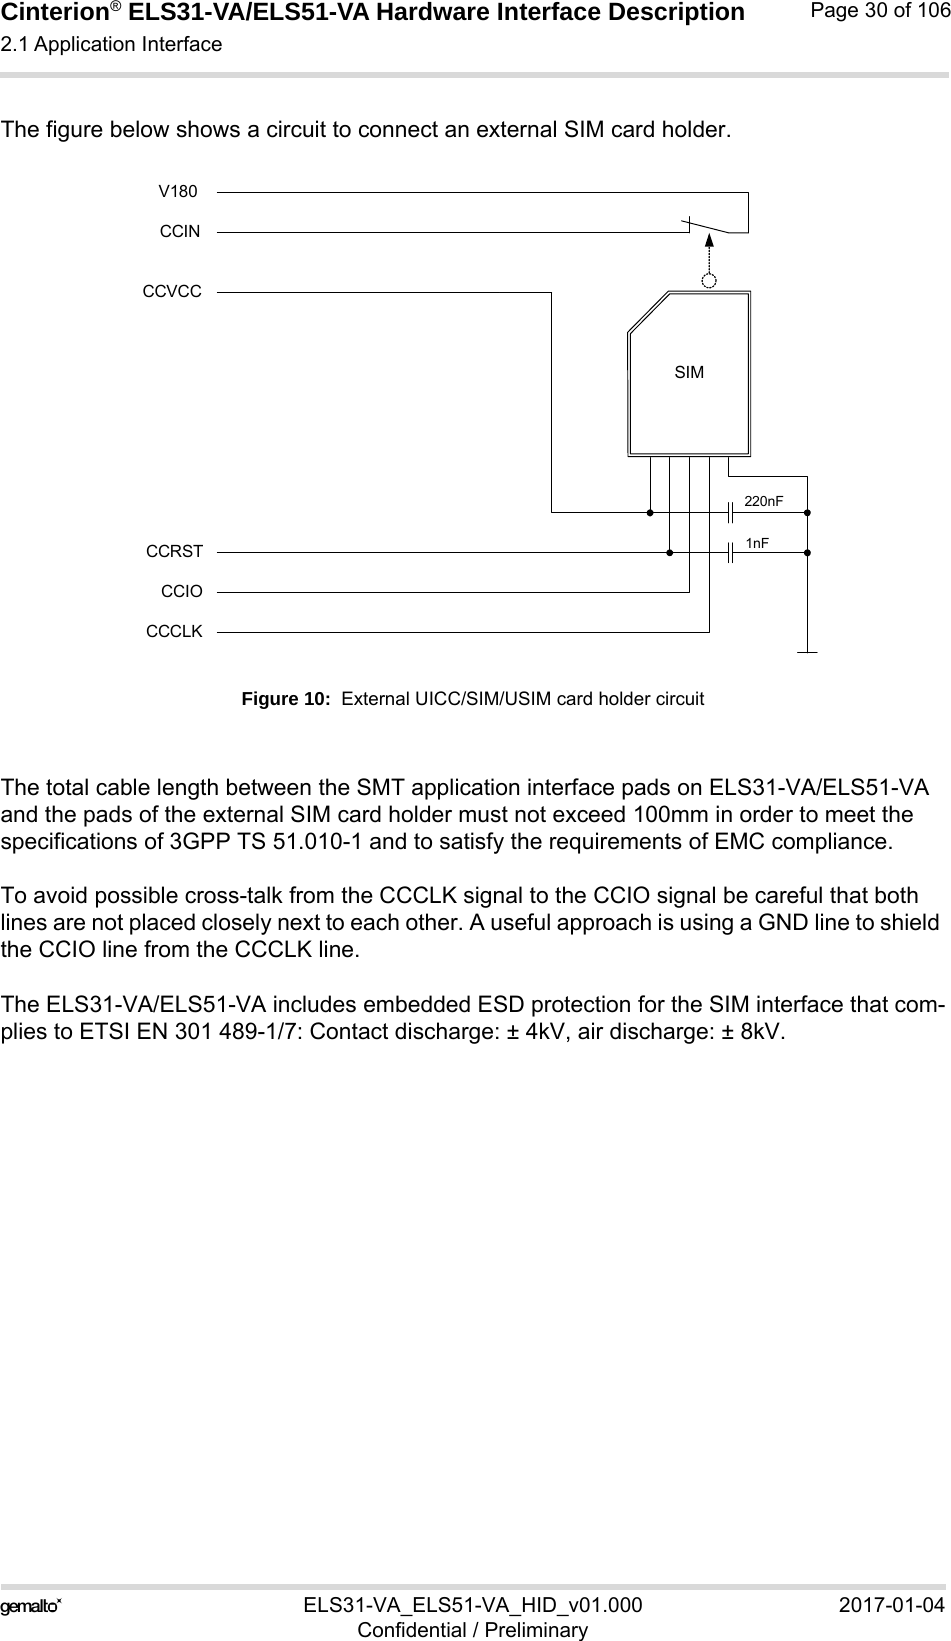 Cinterion® ELS31-VA/ELS51-VA Hardware Interface Description2.1 Application Interface56ELS31-VA_ELS51-VA_HID_v01.000 2017-01-04Confidential / PreliminaryPage 30 of 106The figure below shows a circuit to connect an external SIM card holder.Figure 10:  External UICC/SIM/USIM card holder circuitThe total cable length between the SMT application interface pads on ELS31-VA/ELS51-VA and the pads of the external SIM card holder must not exceed 100mm in order to meet the specifications of 3GPP TS 51.010-1 and to satisfy the requirements of EMC compliance.To avoid possible cross-talk from the CCCLK signal to the CCIO signal be careful that both lines are not placed closely next to each other. A useful approach is using a GND line to shield the CCIO line from the CCCLK line.The ELS31-VA/ELS51-VA includes embedded ESD protection for the SIM interface that com-plies to ETSI EN 301 489-1/7: Contact discharge: ± 4kV, air discharge: ± 8kV.SIMCCVCCCCRSTCCIOCCCLK220nF1nFCCINV180